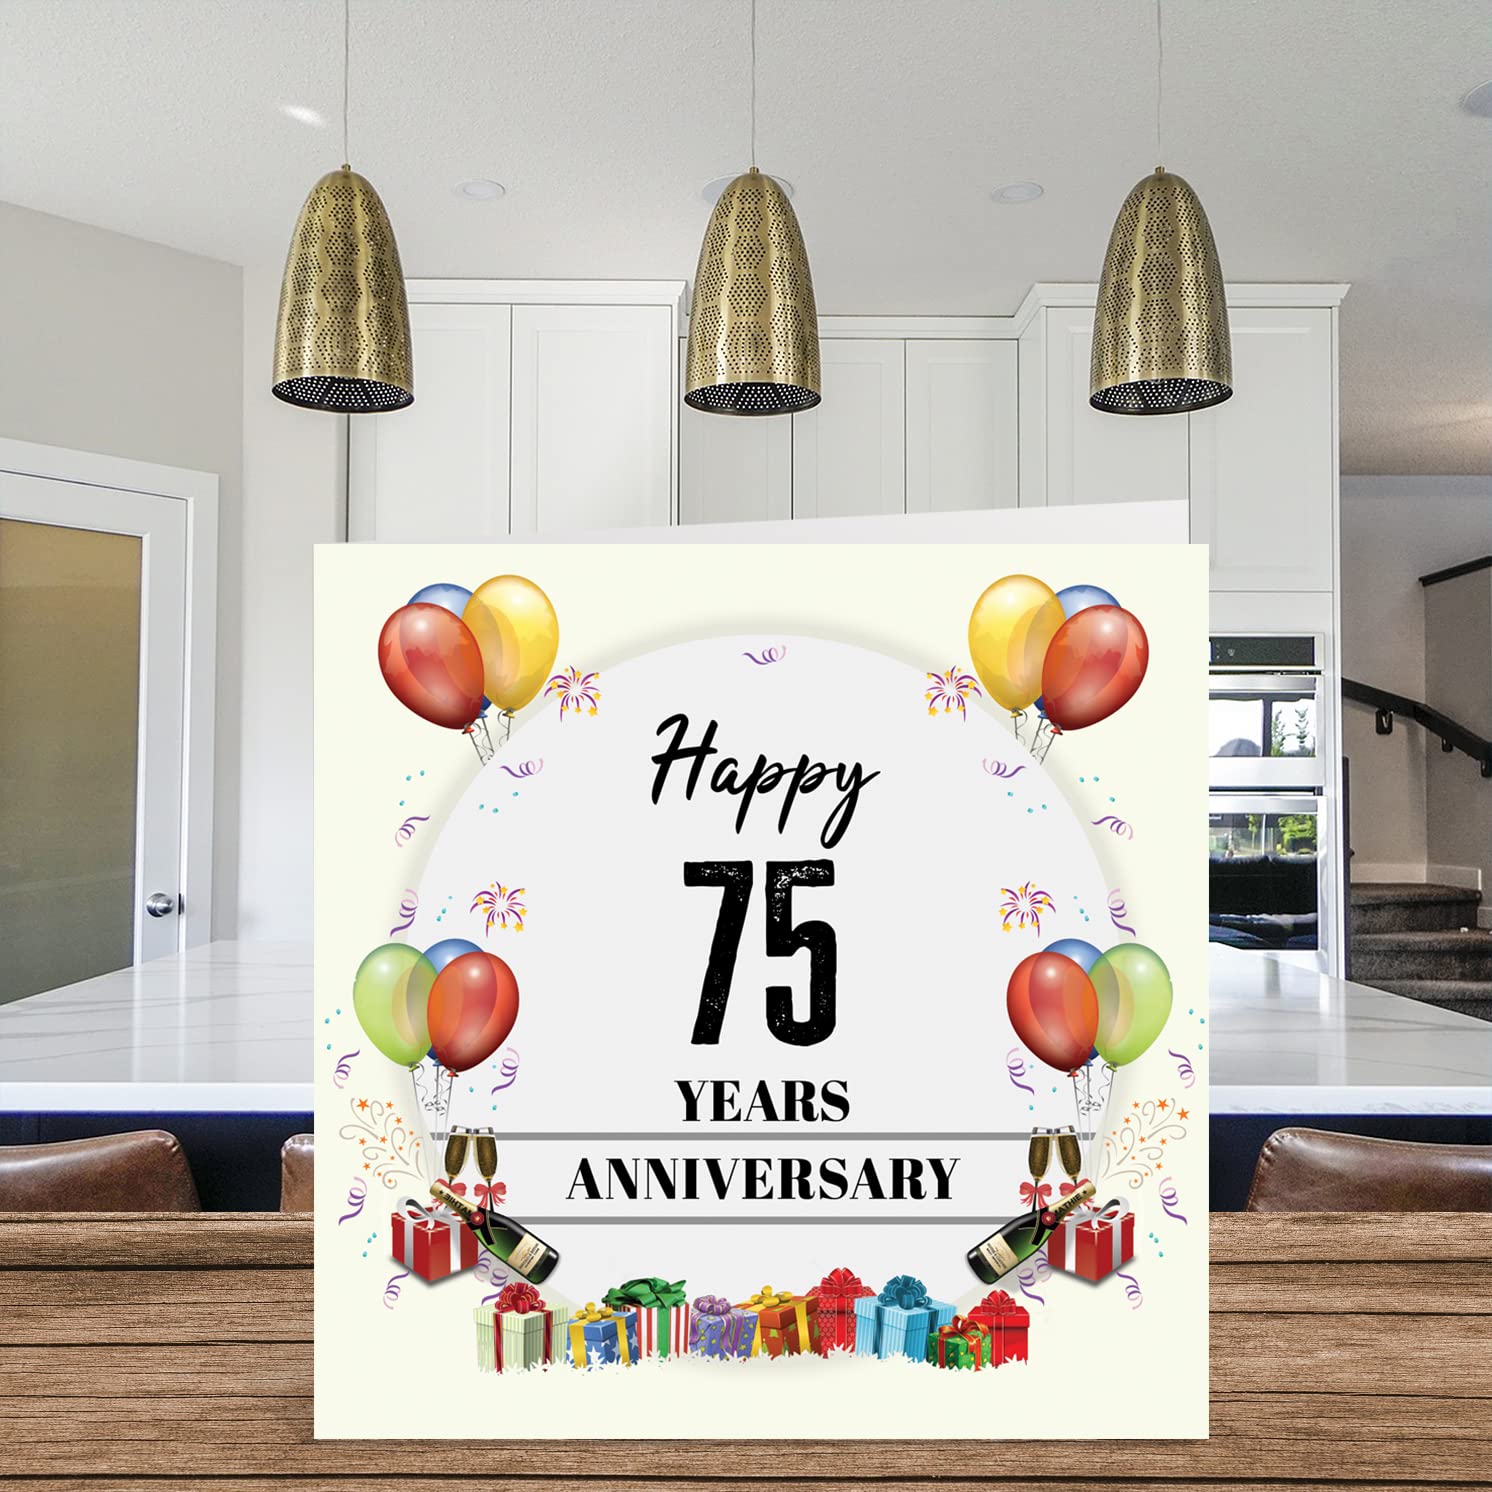 75th Anniversary Card for Husband Wife - Anniversary Party - Happy 75th Wedding Anniversary Card for Partner, 145mm x 145mm Greeting Cards for Seventy-Fifth Anniversaries